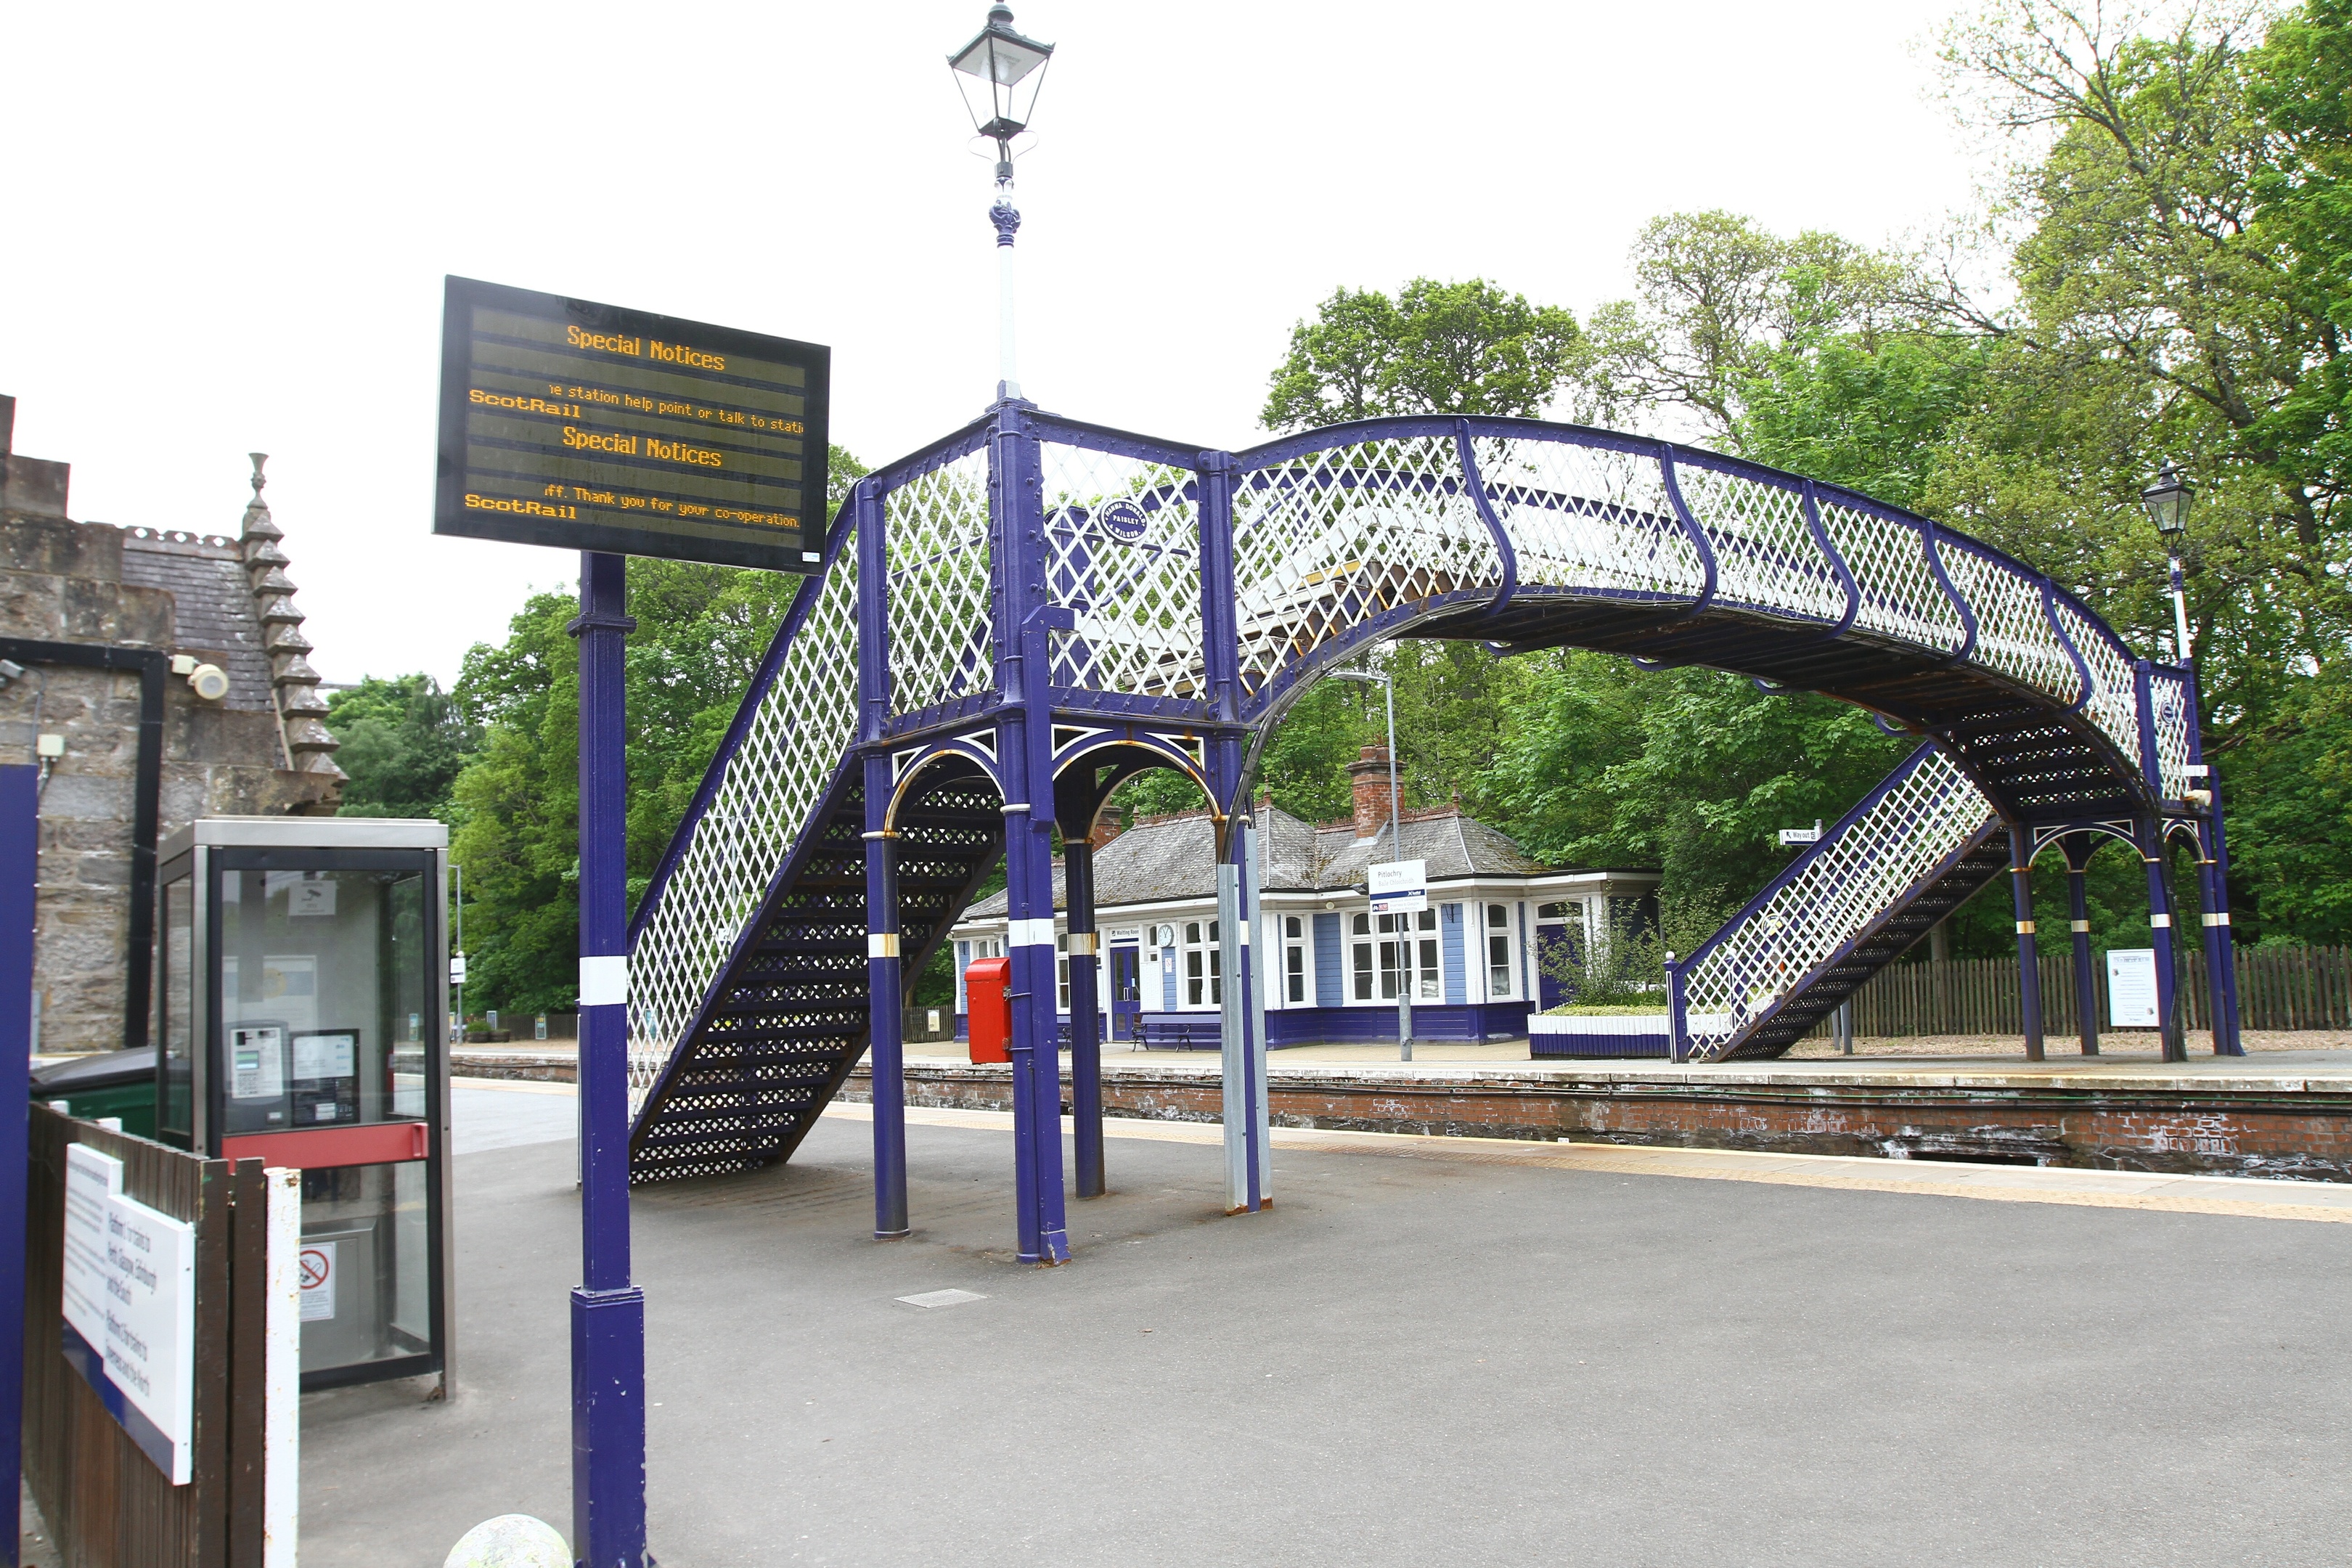 The platform at Pitlochry will be extended under the improvement scheme